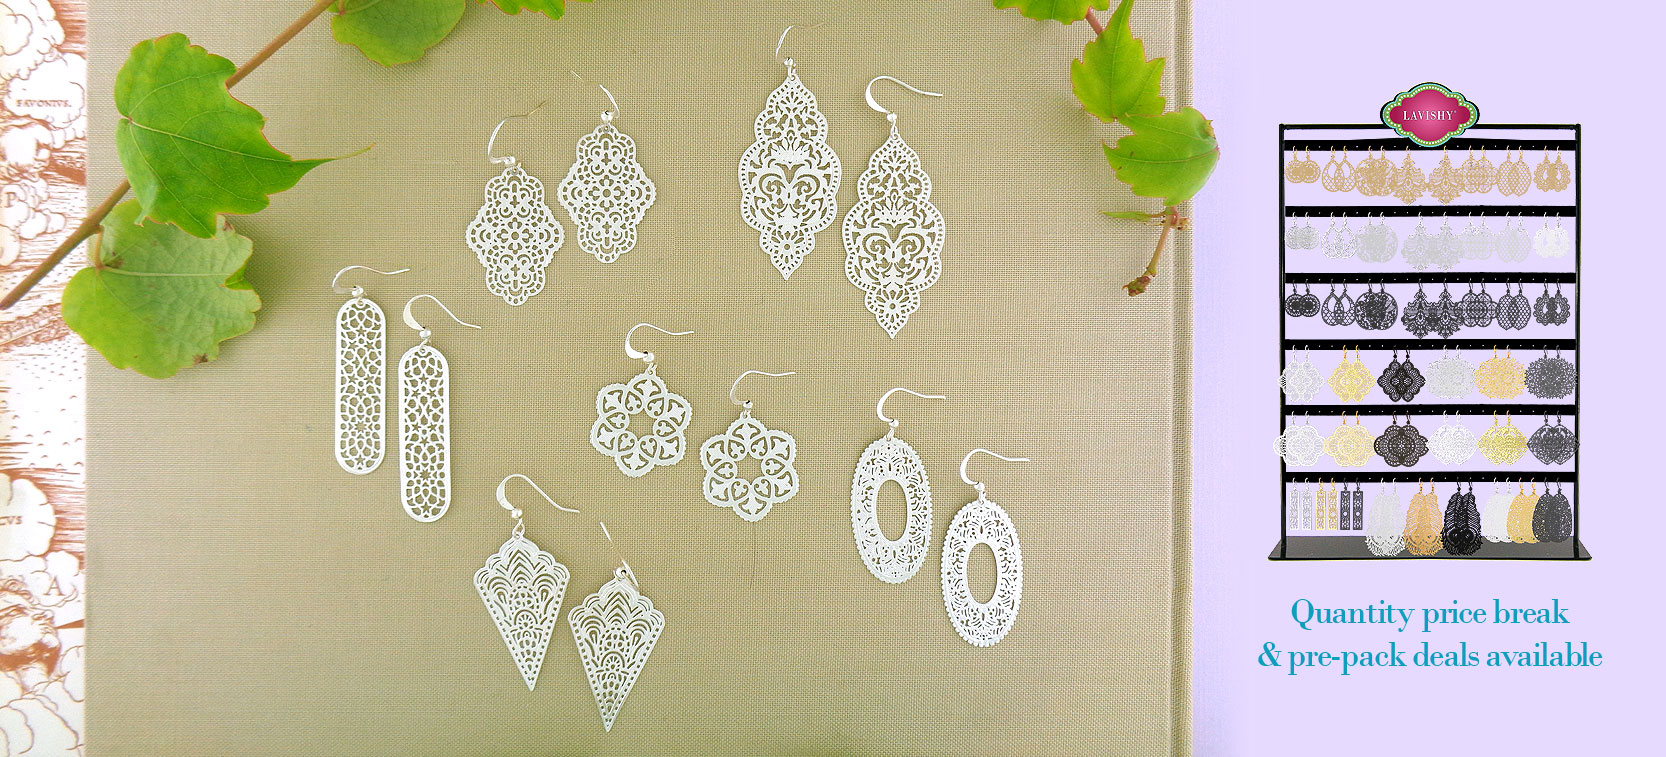 lavishy design & wholesale original, beautiful & affordable filigree earrings  to gift shops, boutiques & book stores in Canada, USA and worldwide.